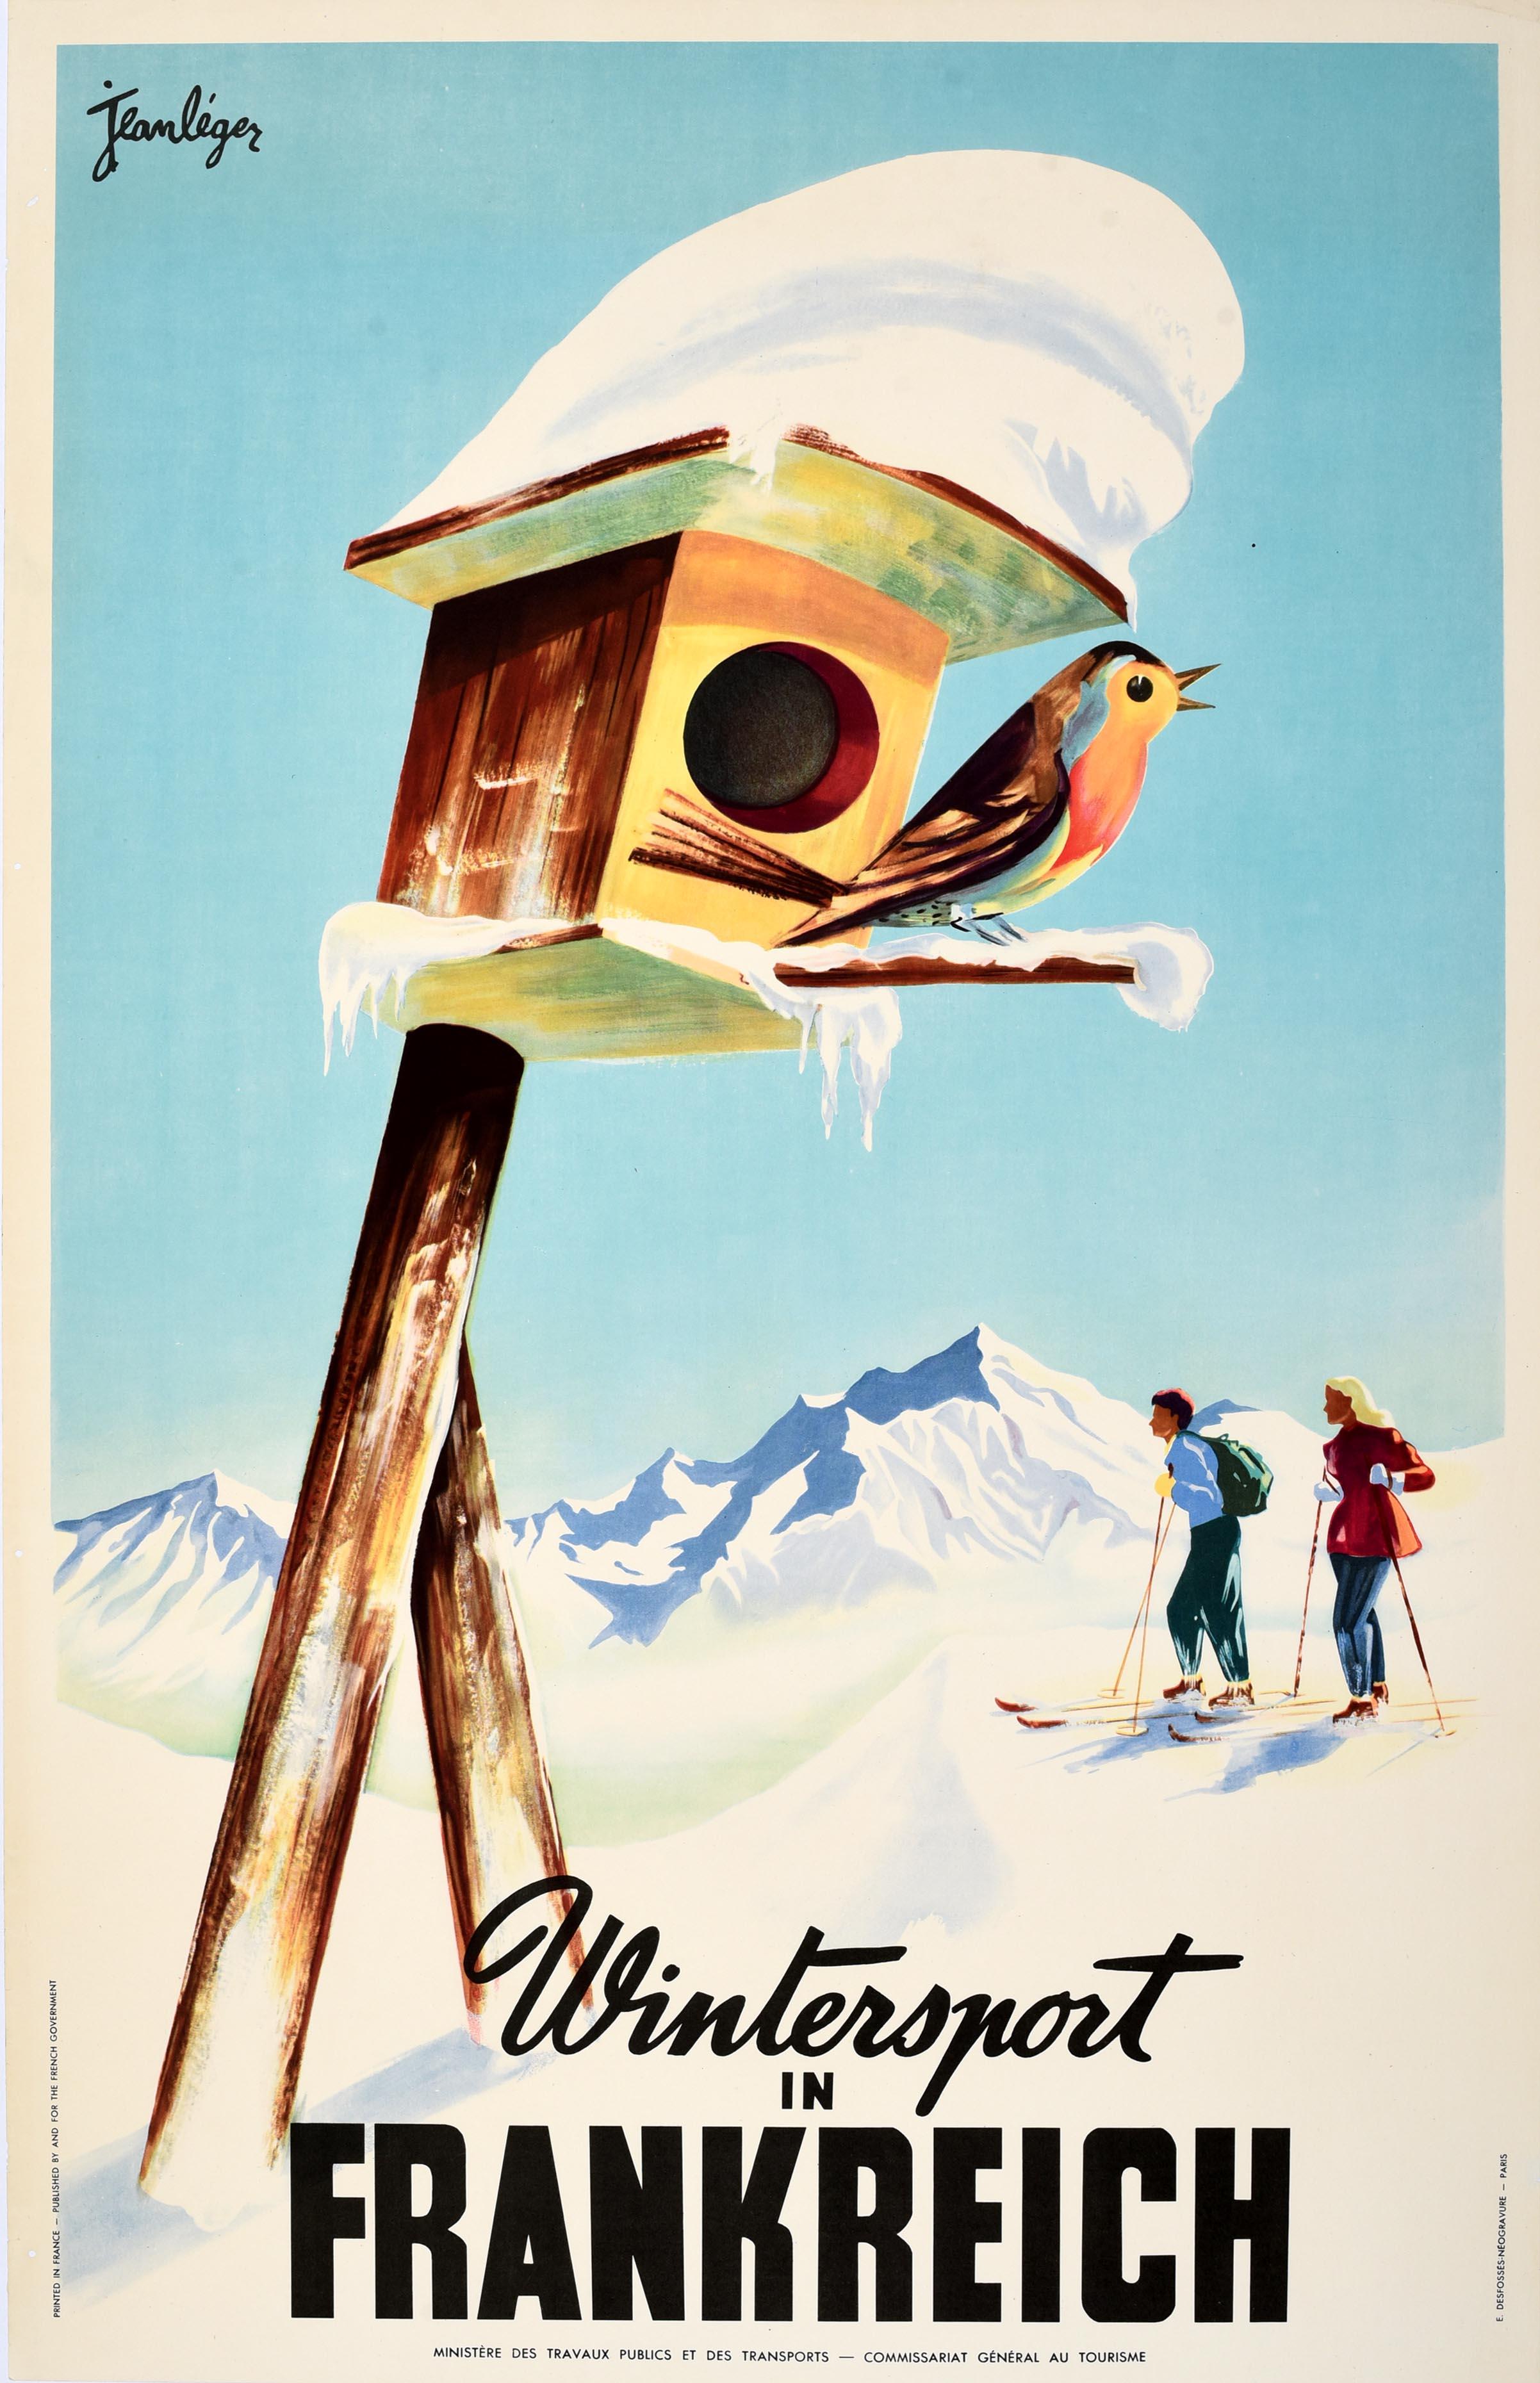 Original vintage skiing poster advertising Winter Sports in France / Wintersport in Frankreich - featuring a great design depicting a couple on skis enjoying the view of the snowy mountains below the blue sky background, a robin redbreast bird on a